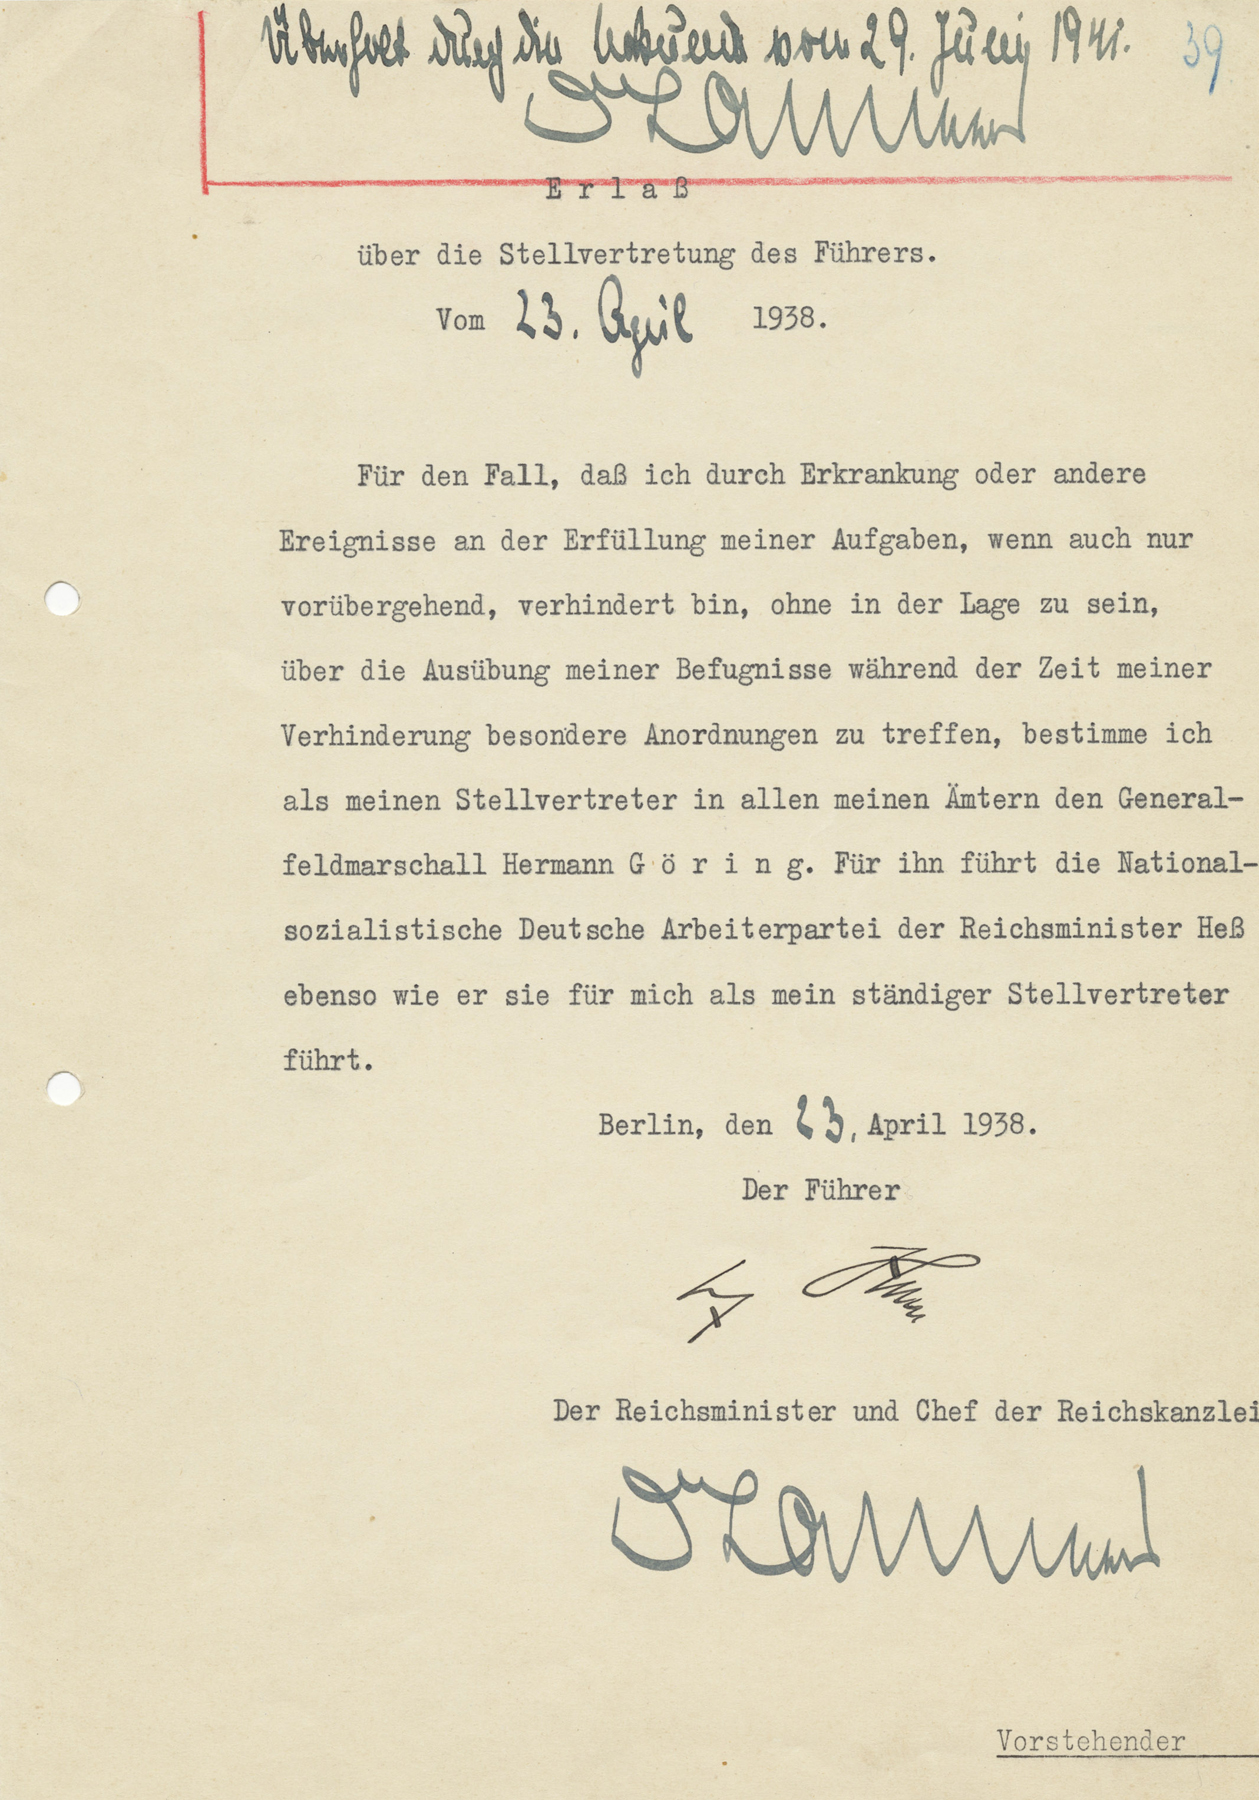 Adolf Hitler names Hermann Göring as his deputy in case of illness or other incapacity